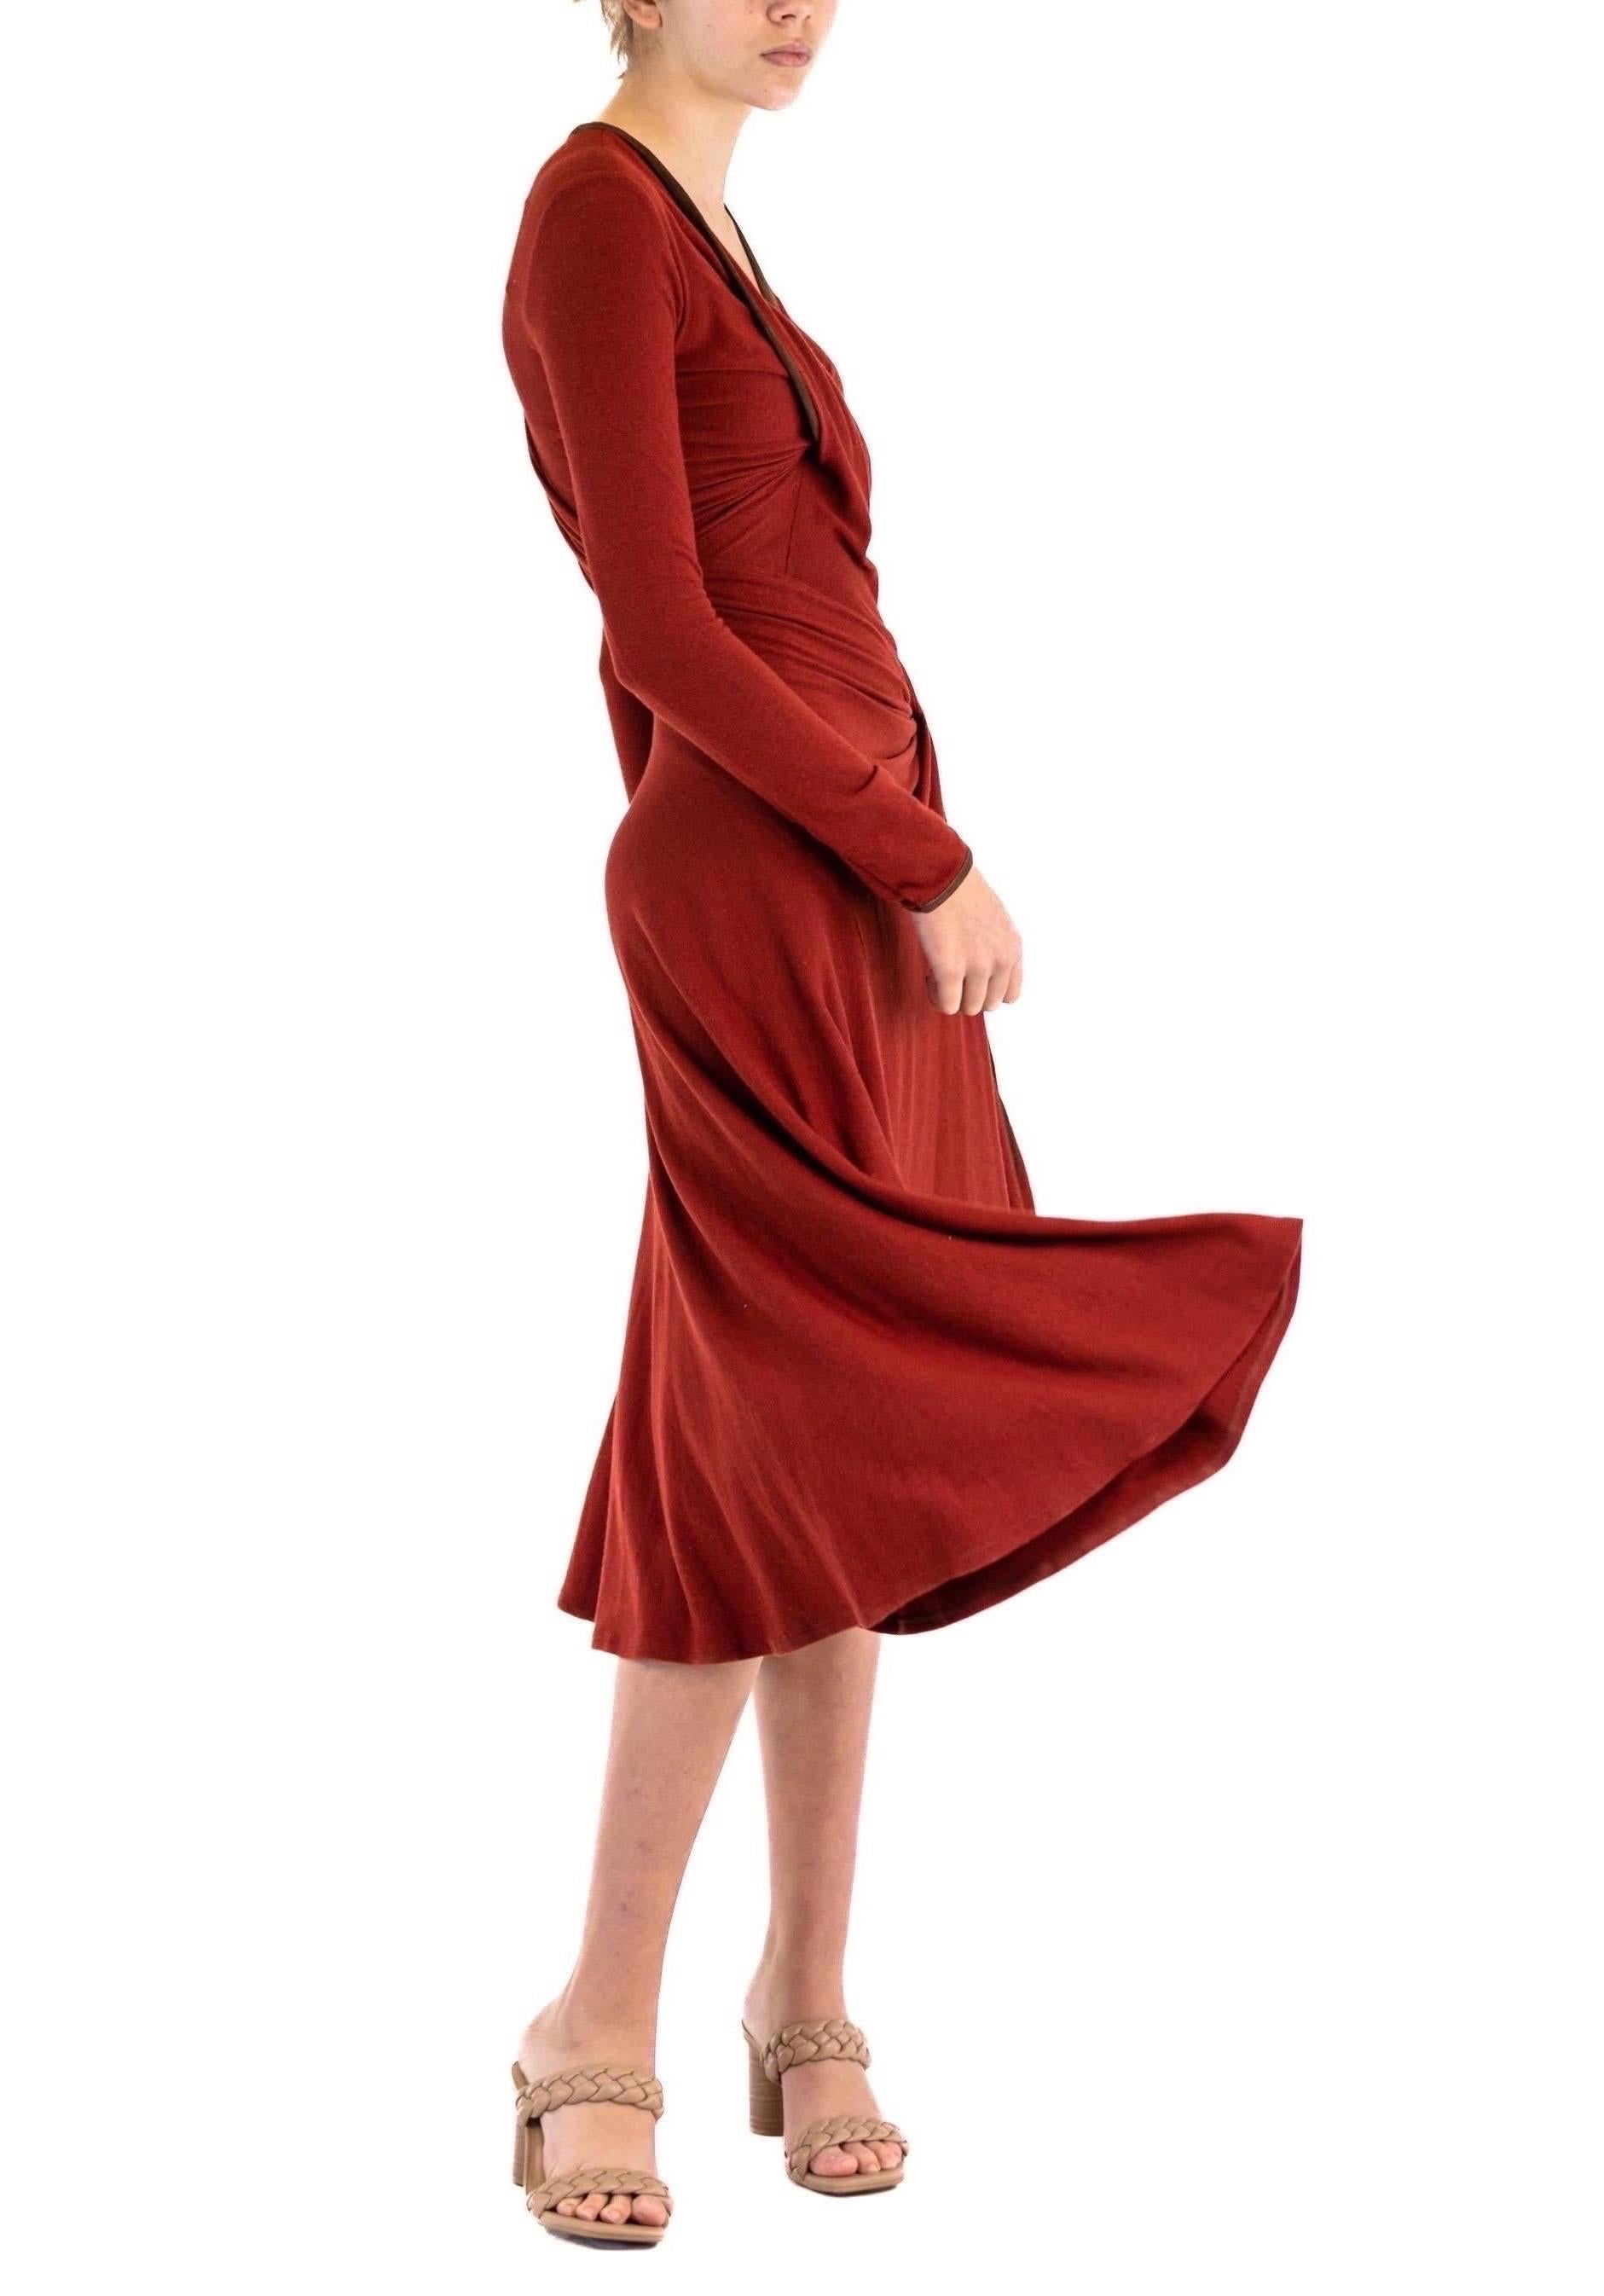 2000S DONNA KARAN Rust Red Wool Blend Jersey Dress With Lambskin Suede Trim For Sale 1